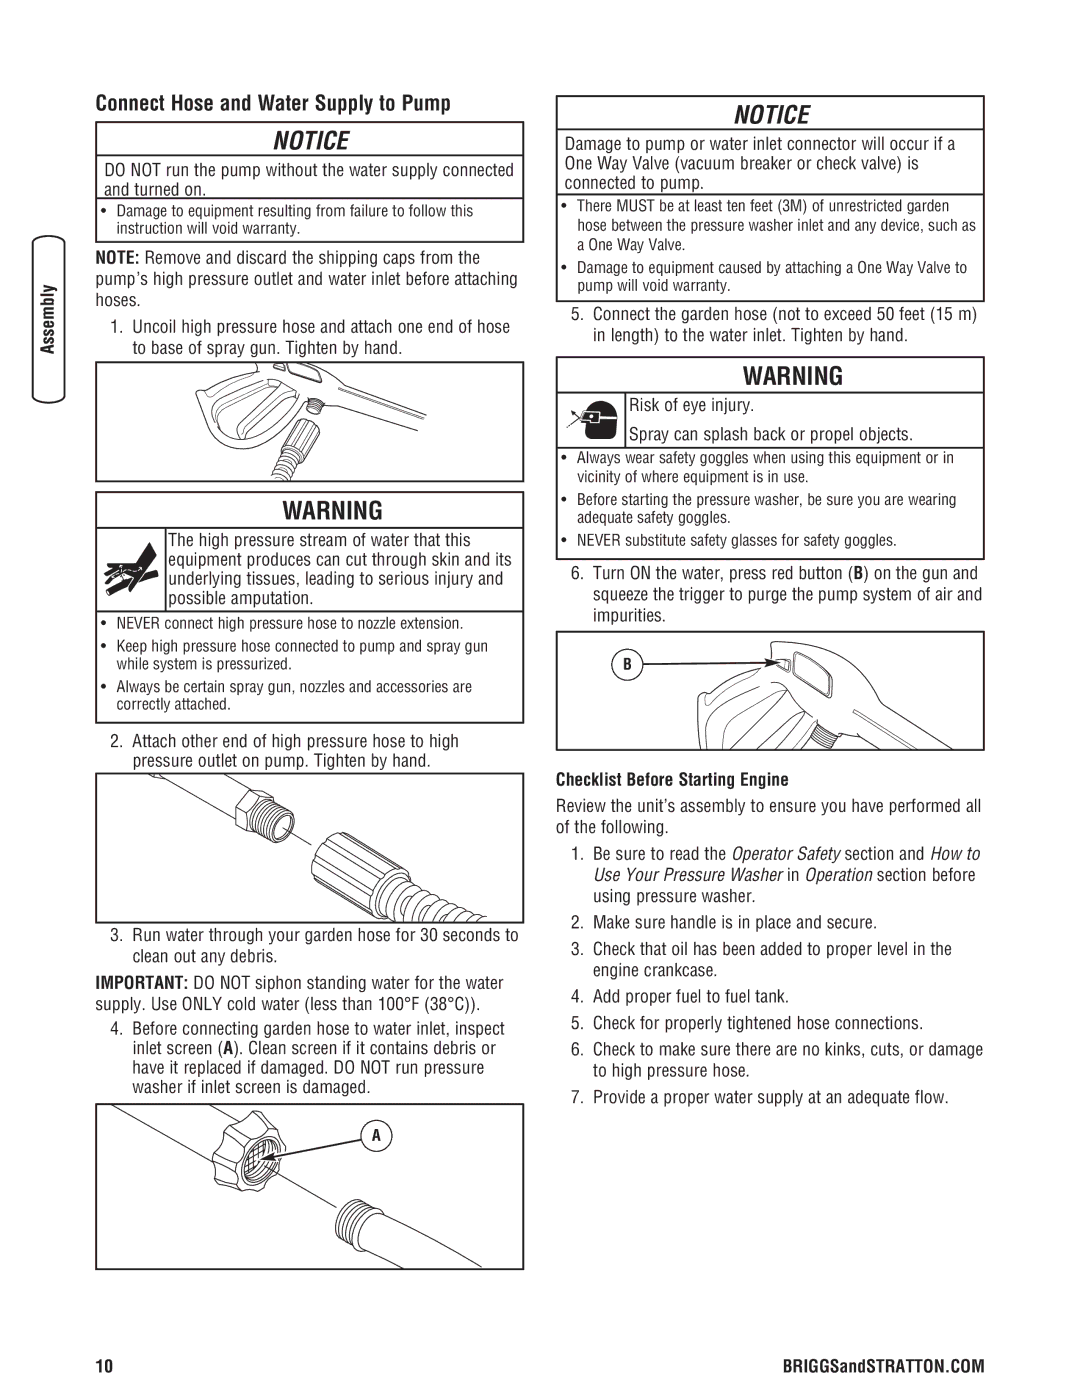 Briggs & Stratton Pressure Washer manual Connect Hose and Water Supply to Pump, Checklist Before Starting Engine 